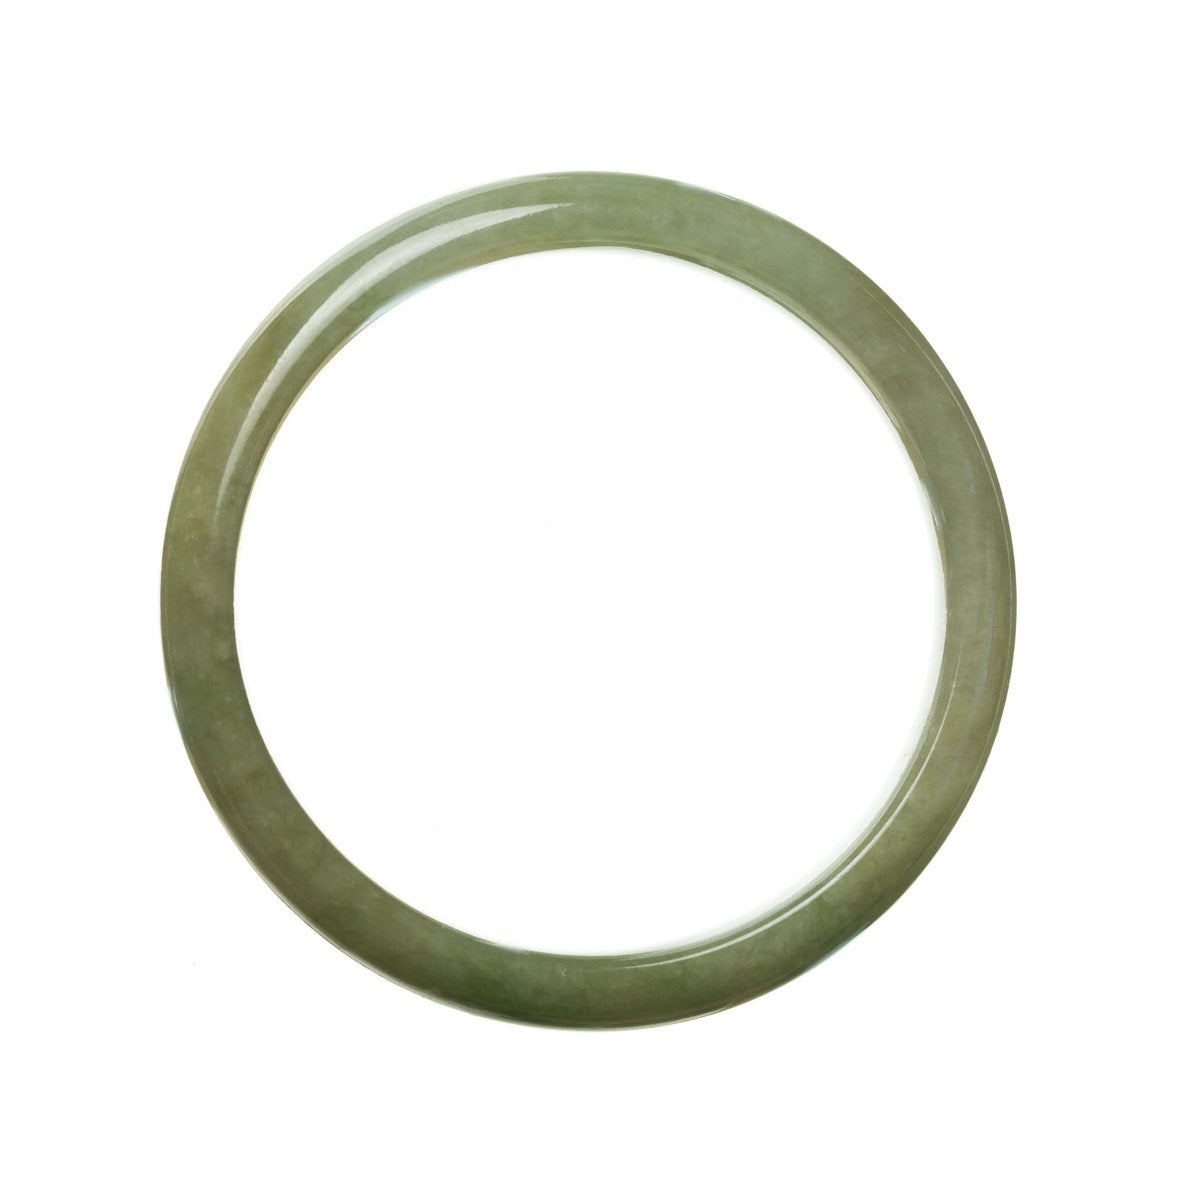 A half moon-shaped, genuine Type A green traditional jade bracelet, measuring 59mm.